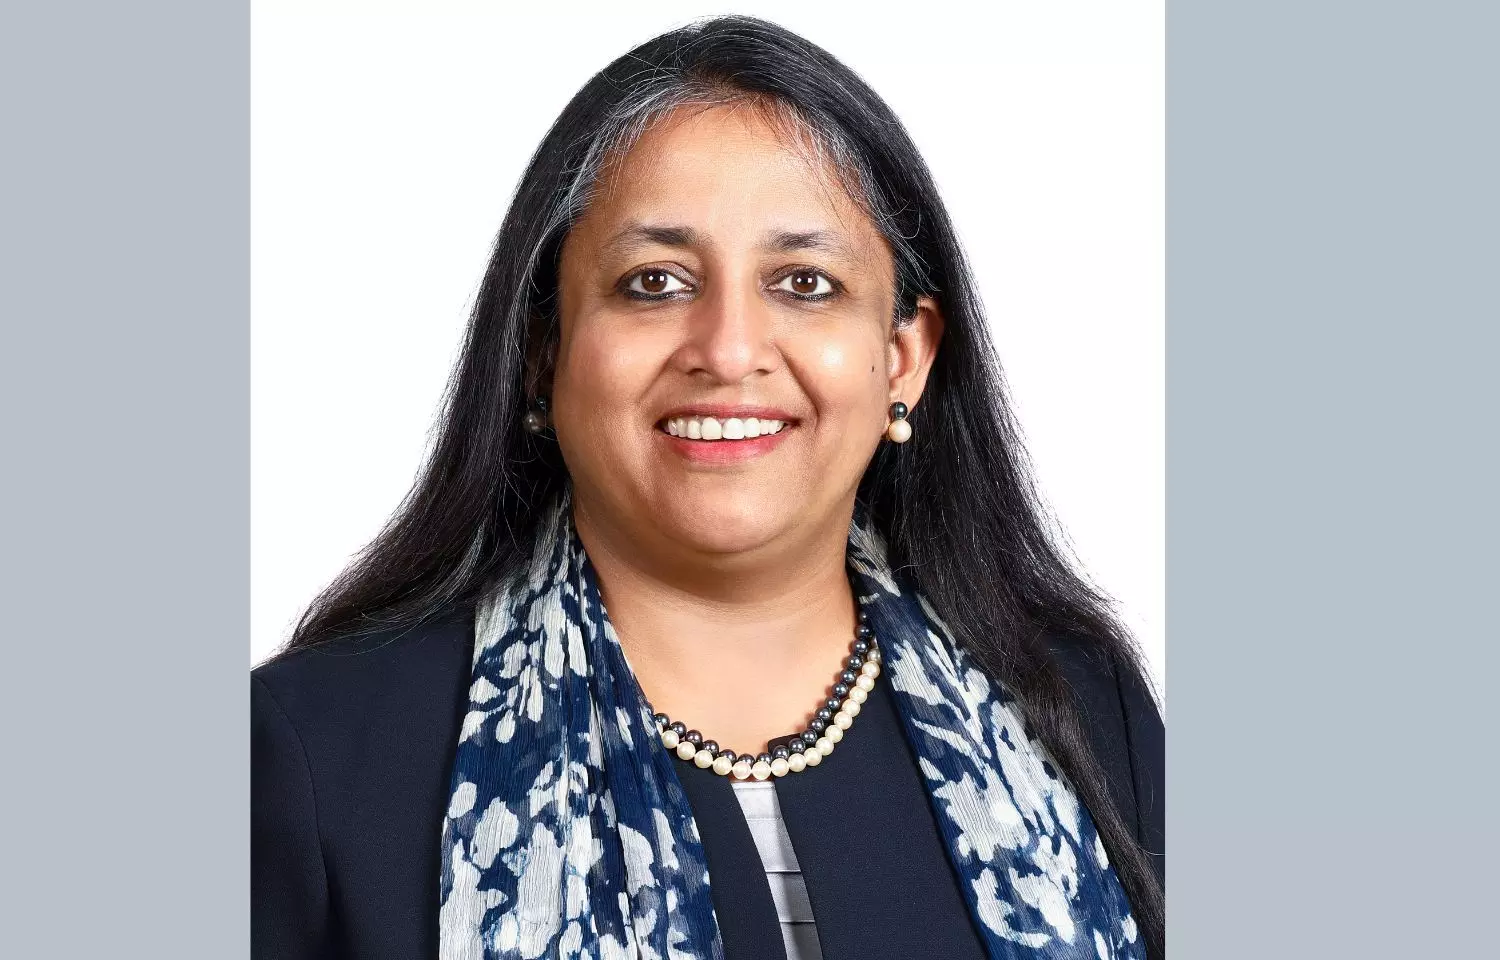 Stryker India MD Meenakshi Nevatia joins APACMed as Chairperson ...